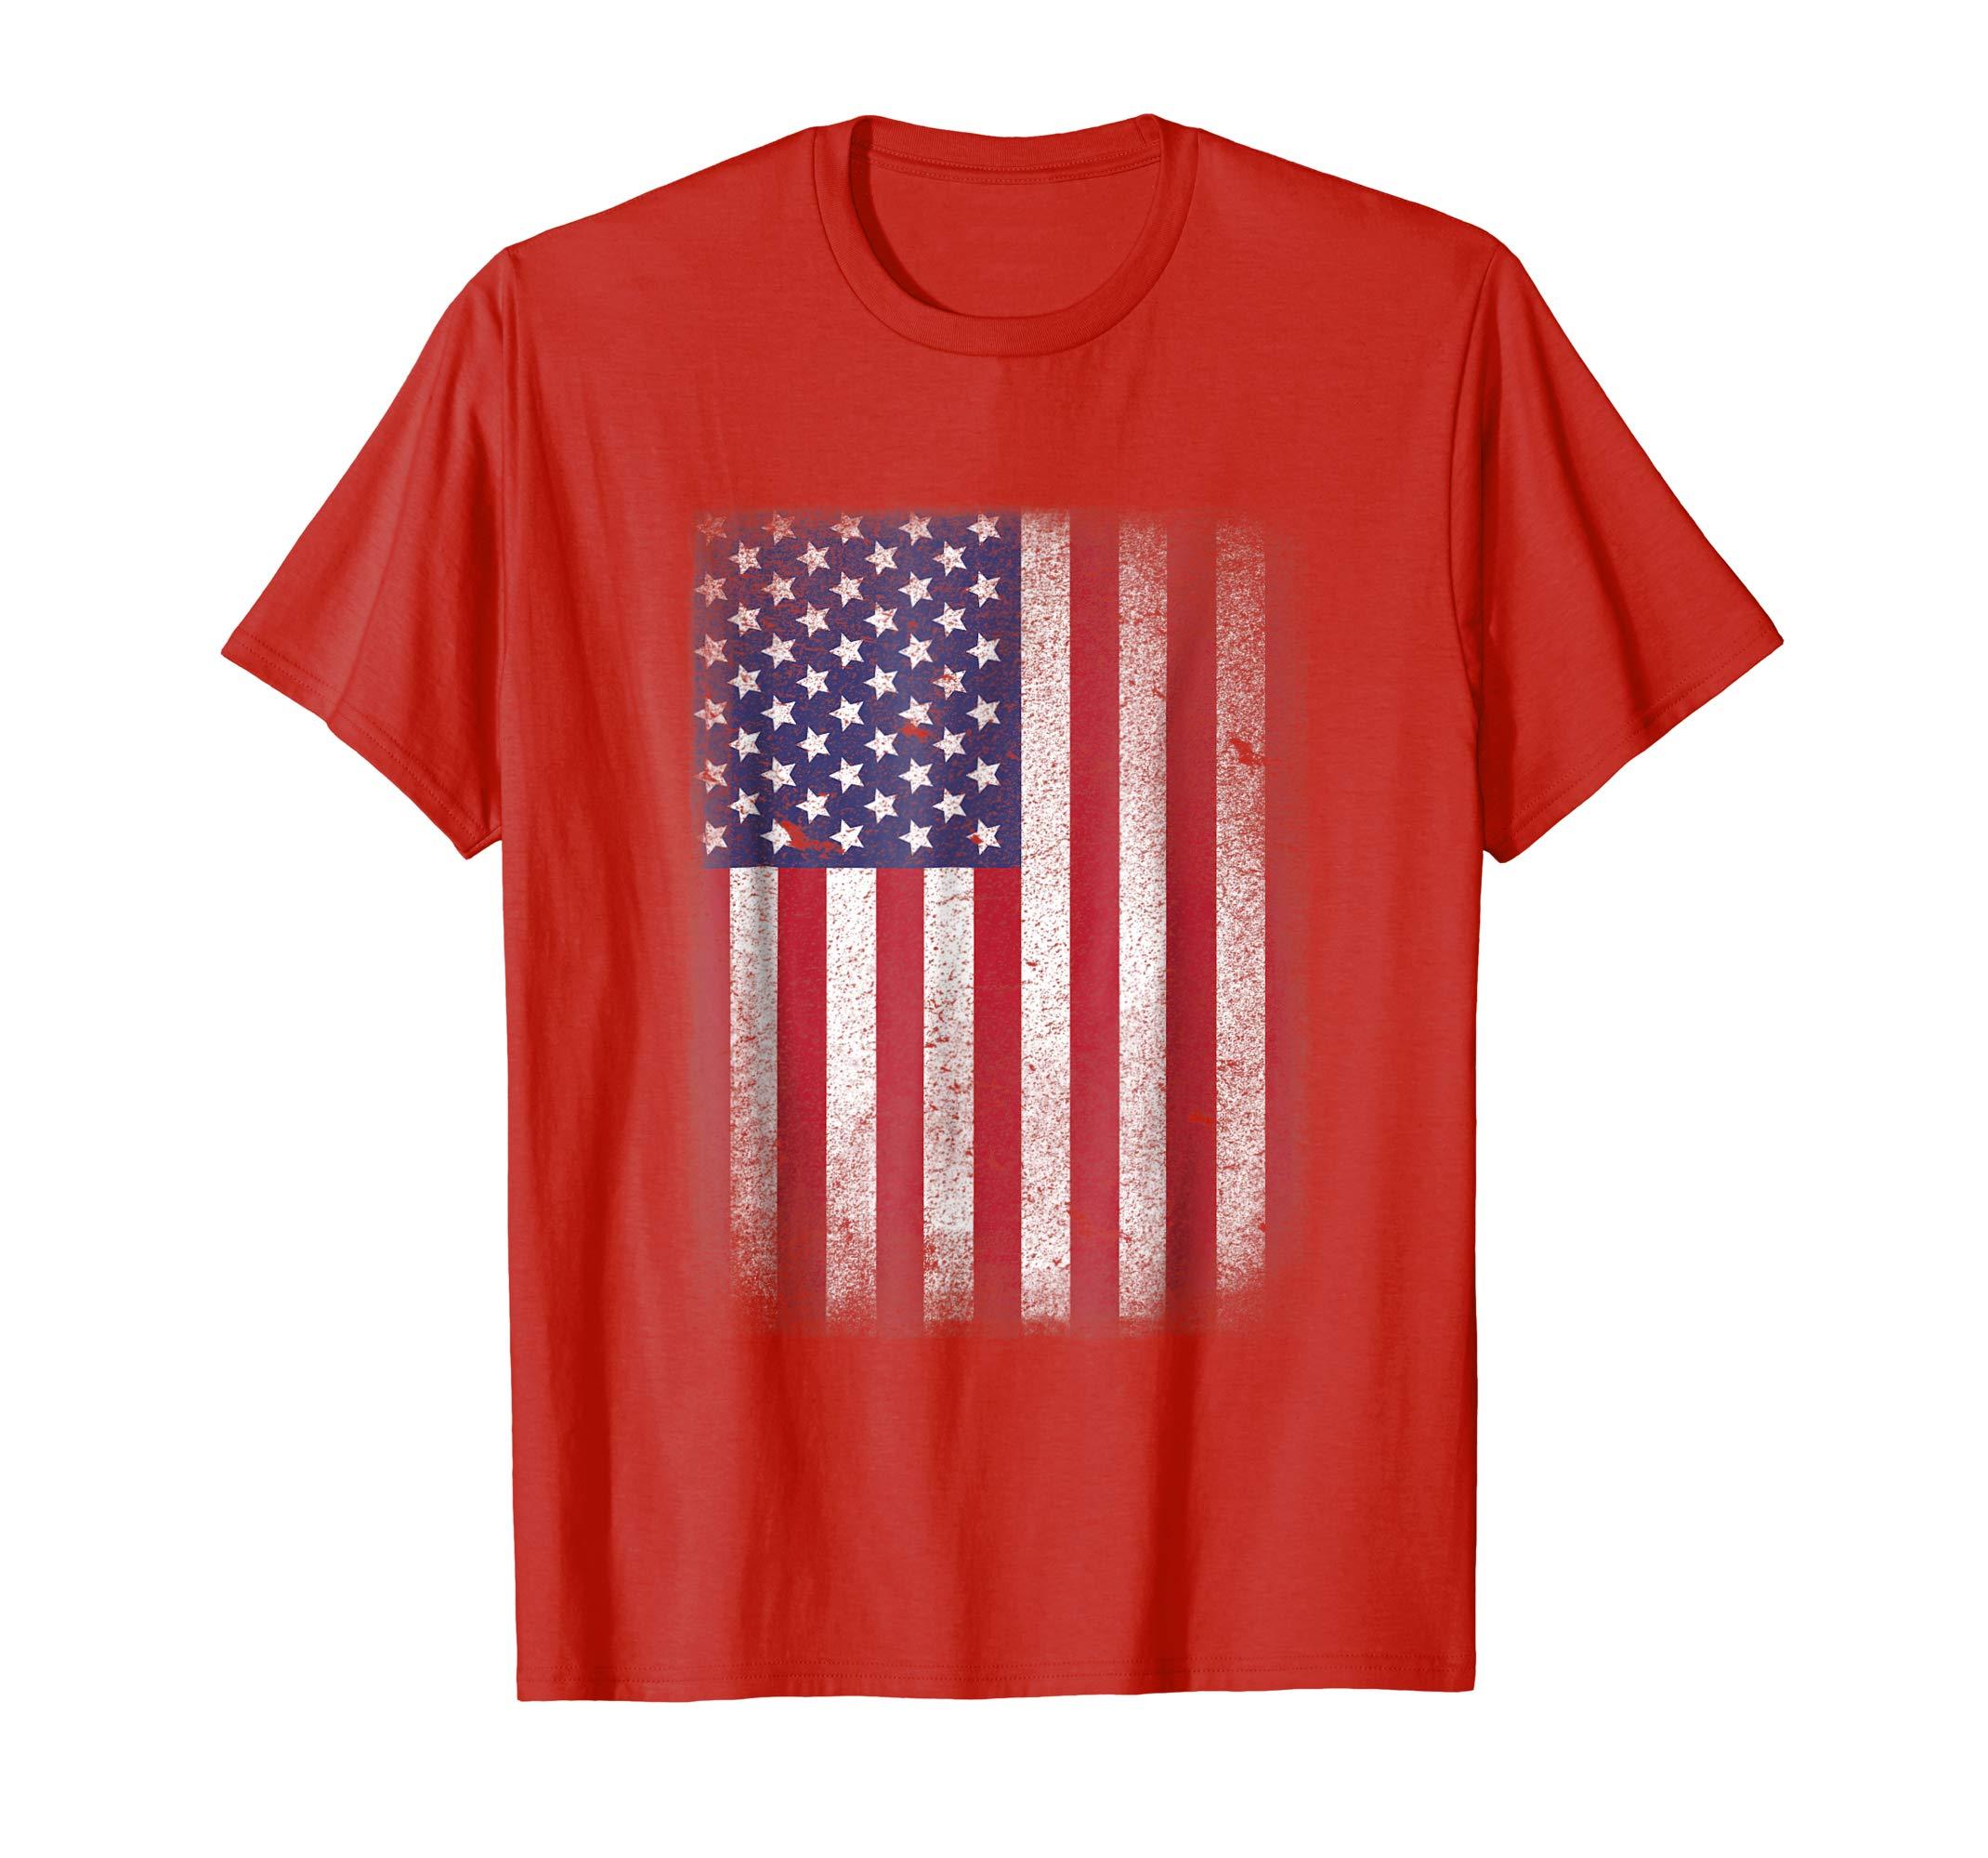 Red White and Blue Clothing Logo - USA Flag T Shirt 4th July 4 Red White Blue Stars Stripes